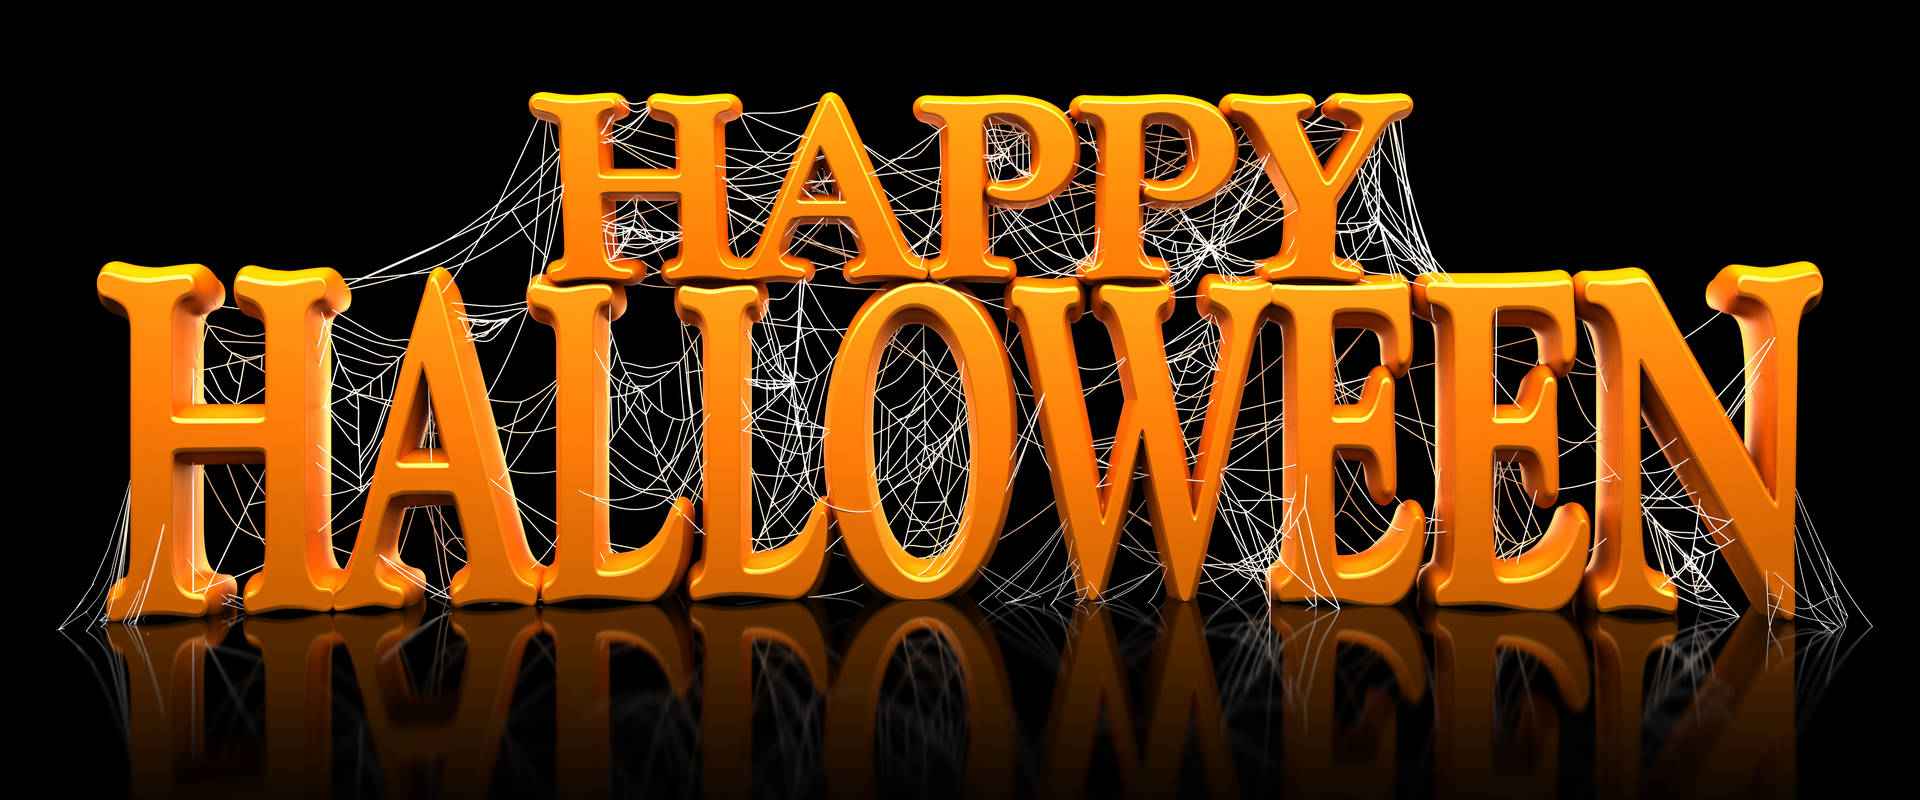 Trick Or Treat! Have A Happy Halloween Background